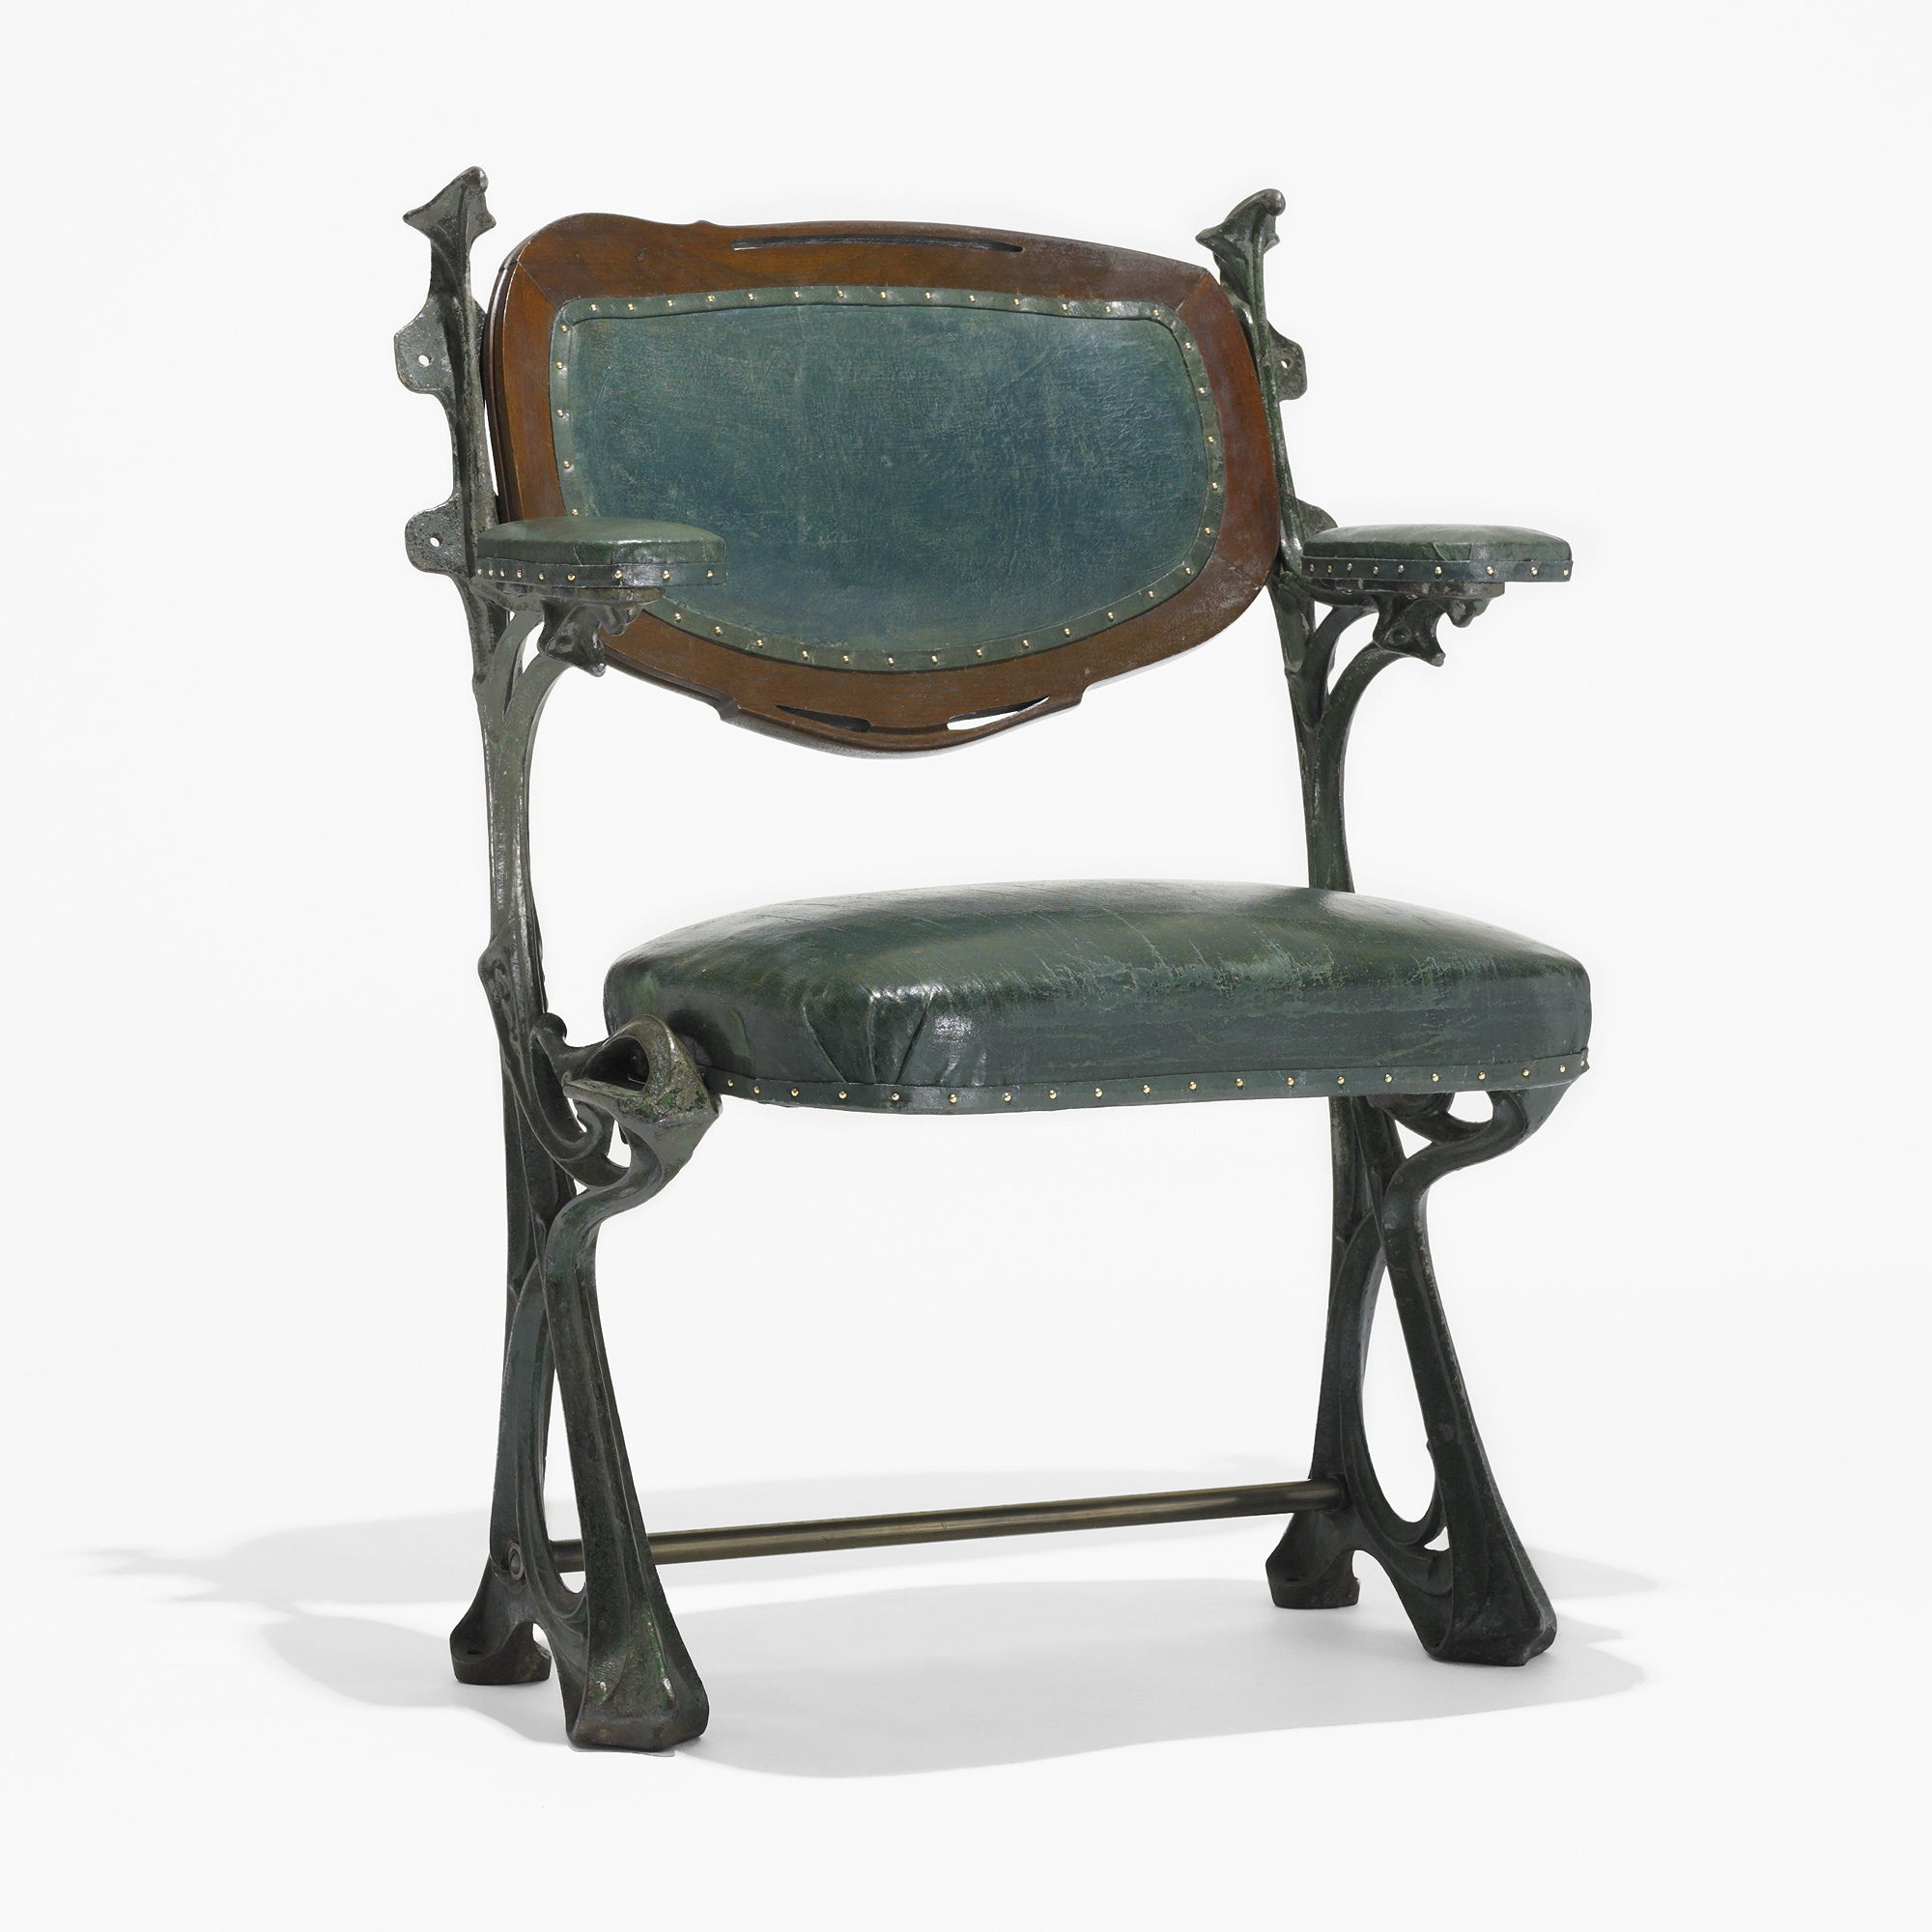 Hector Guimard chair from Humbert de Romans Concert Hall, Paris. Photo: Courtesy of Wright Auctions.